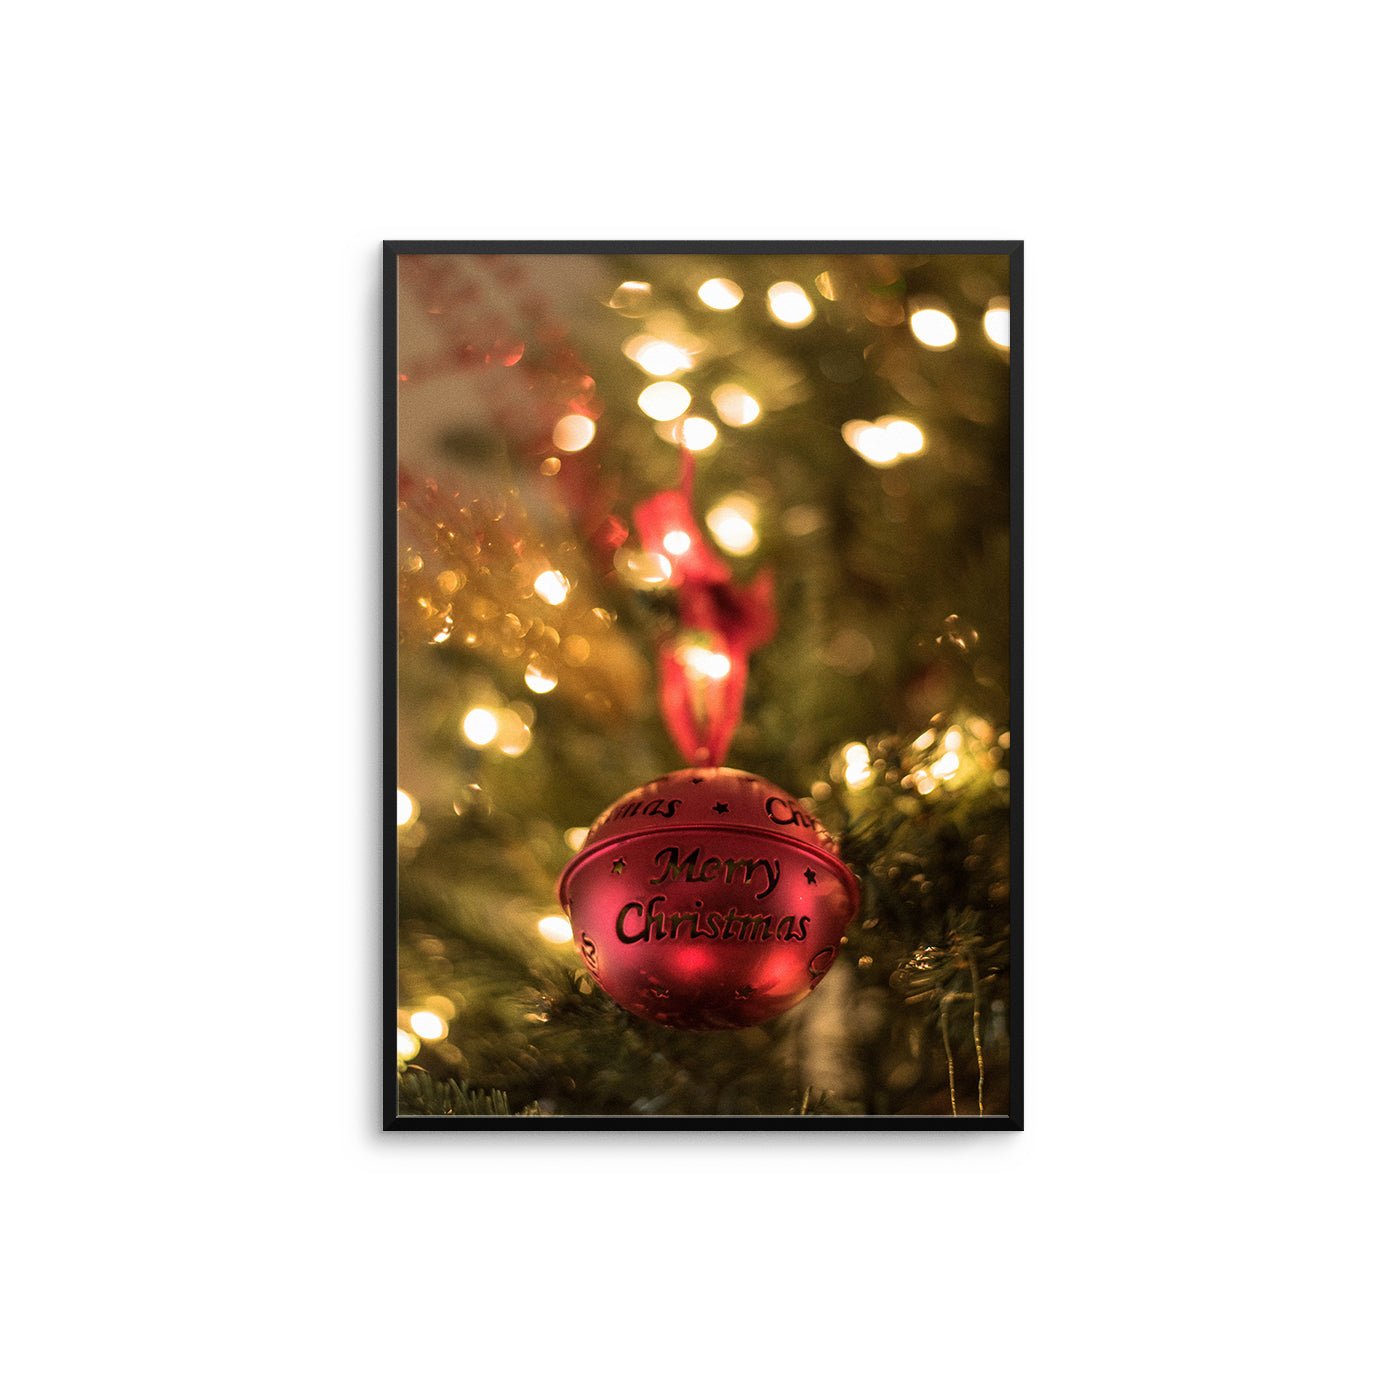 Merry Christmas Bauble - D'Luxe Prints